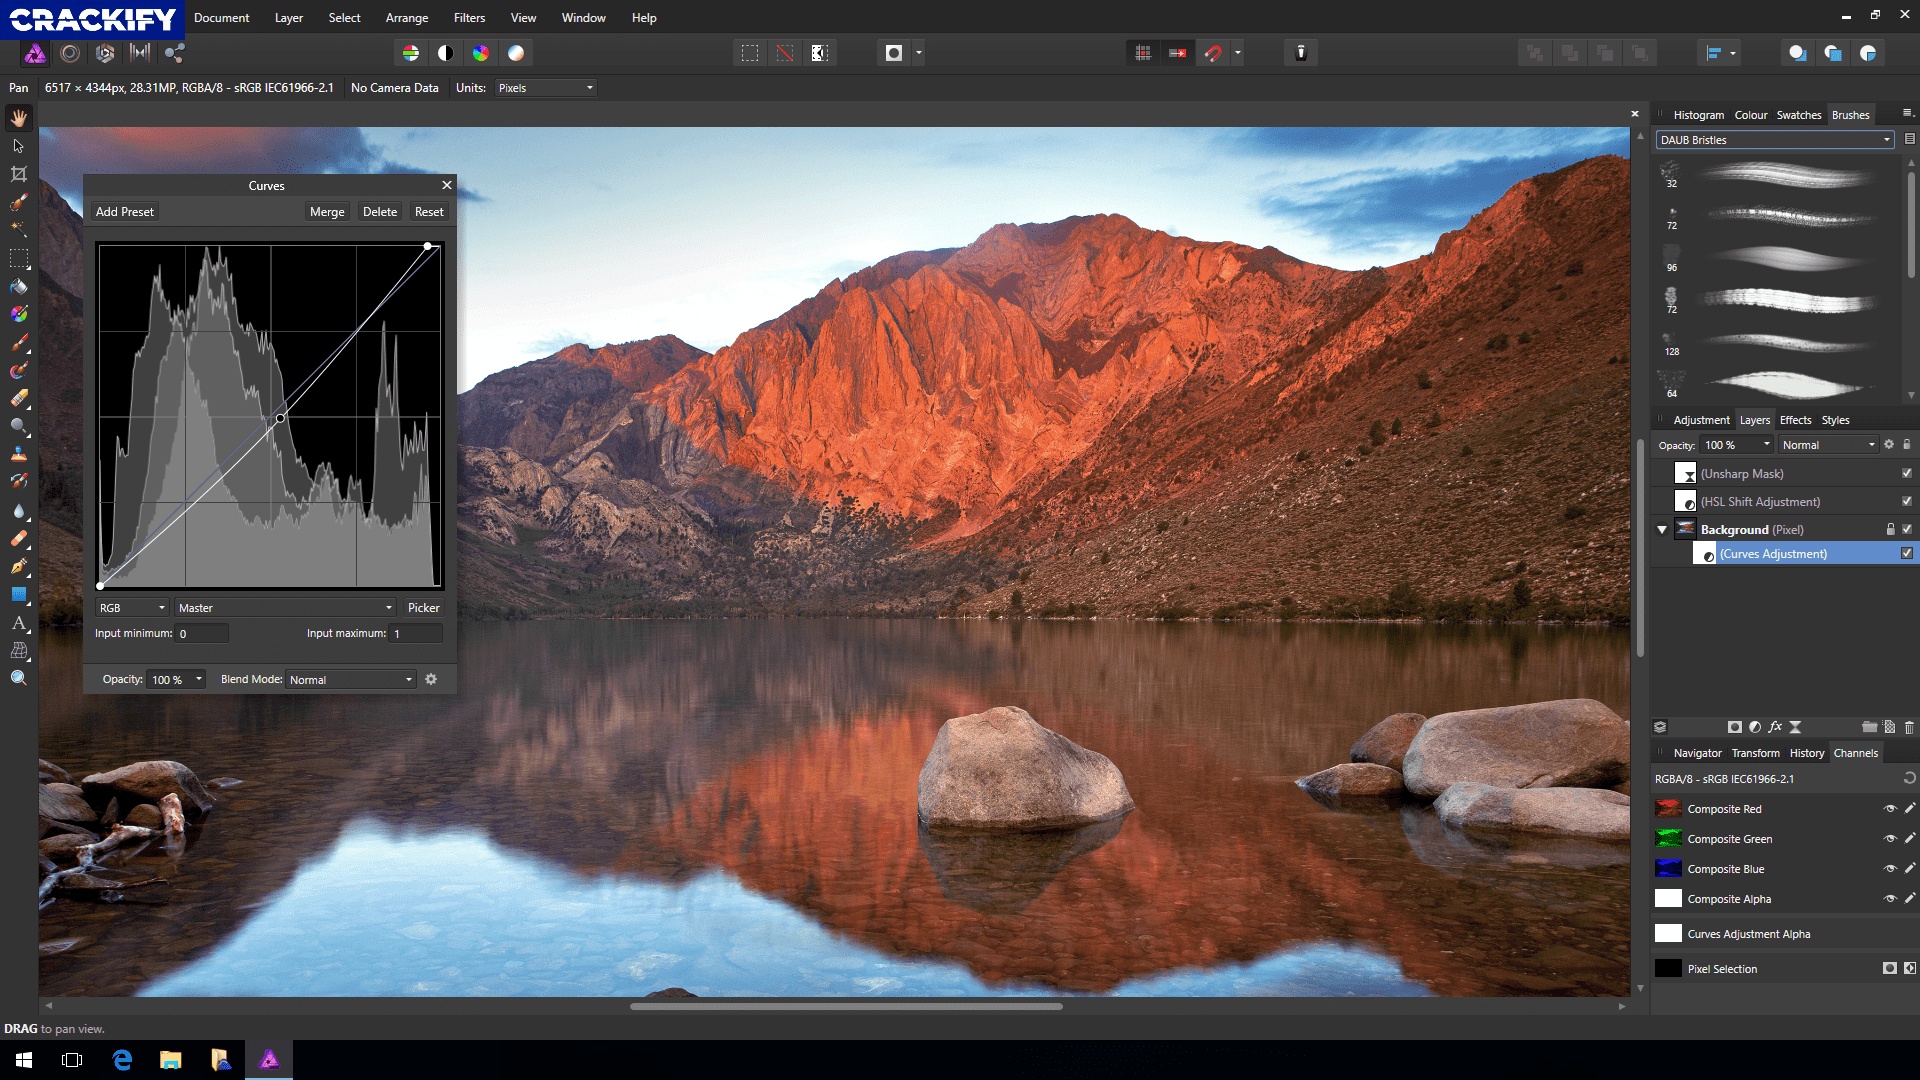 affinity photo free download for windows with crack